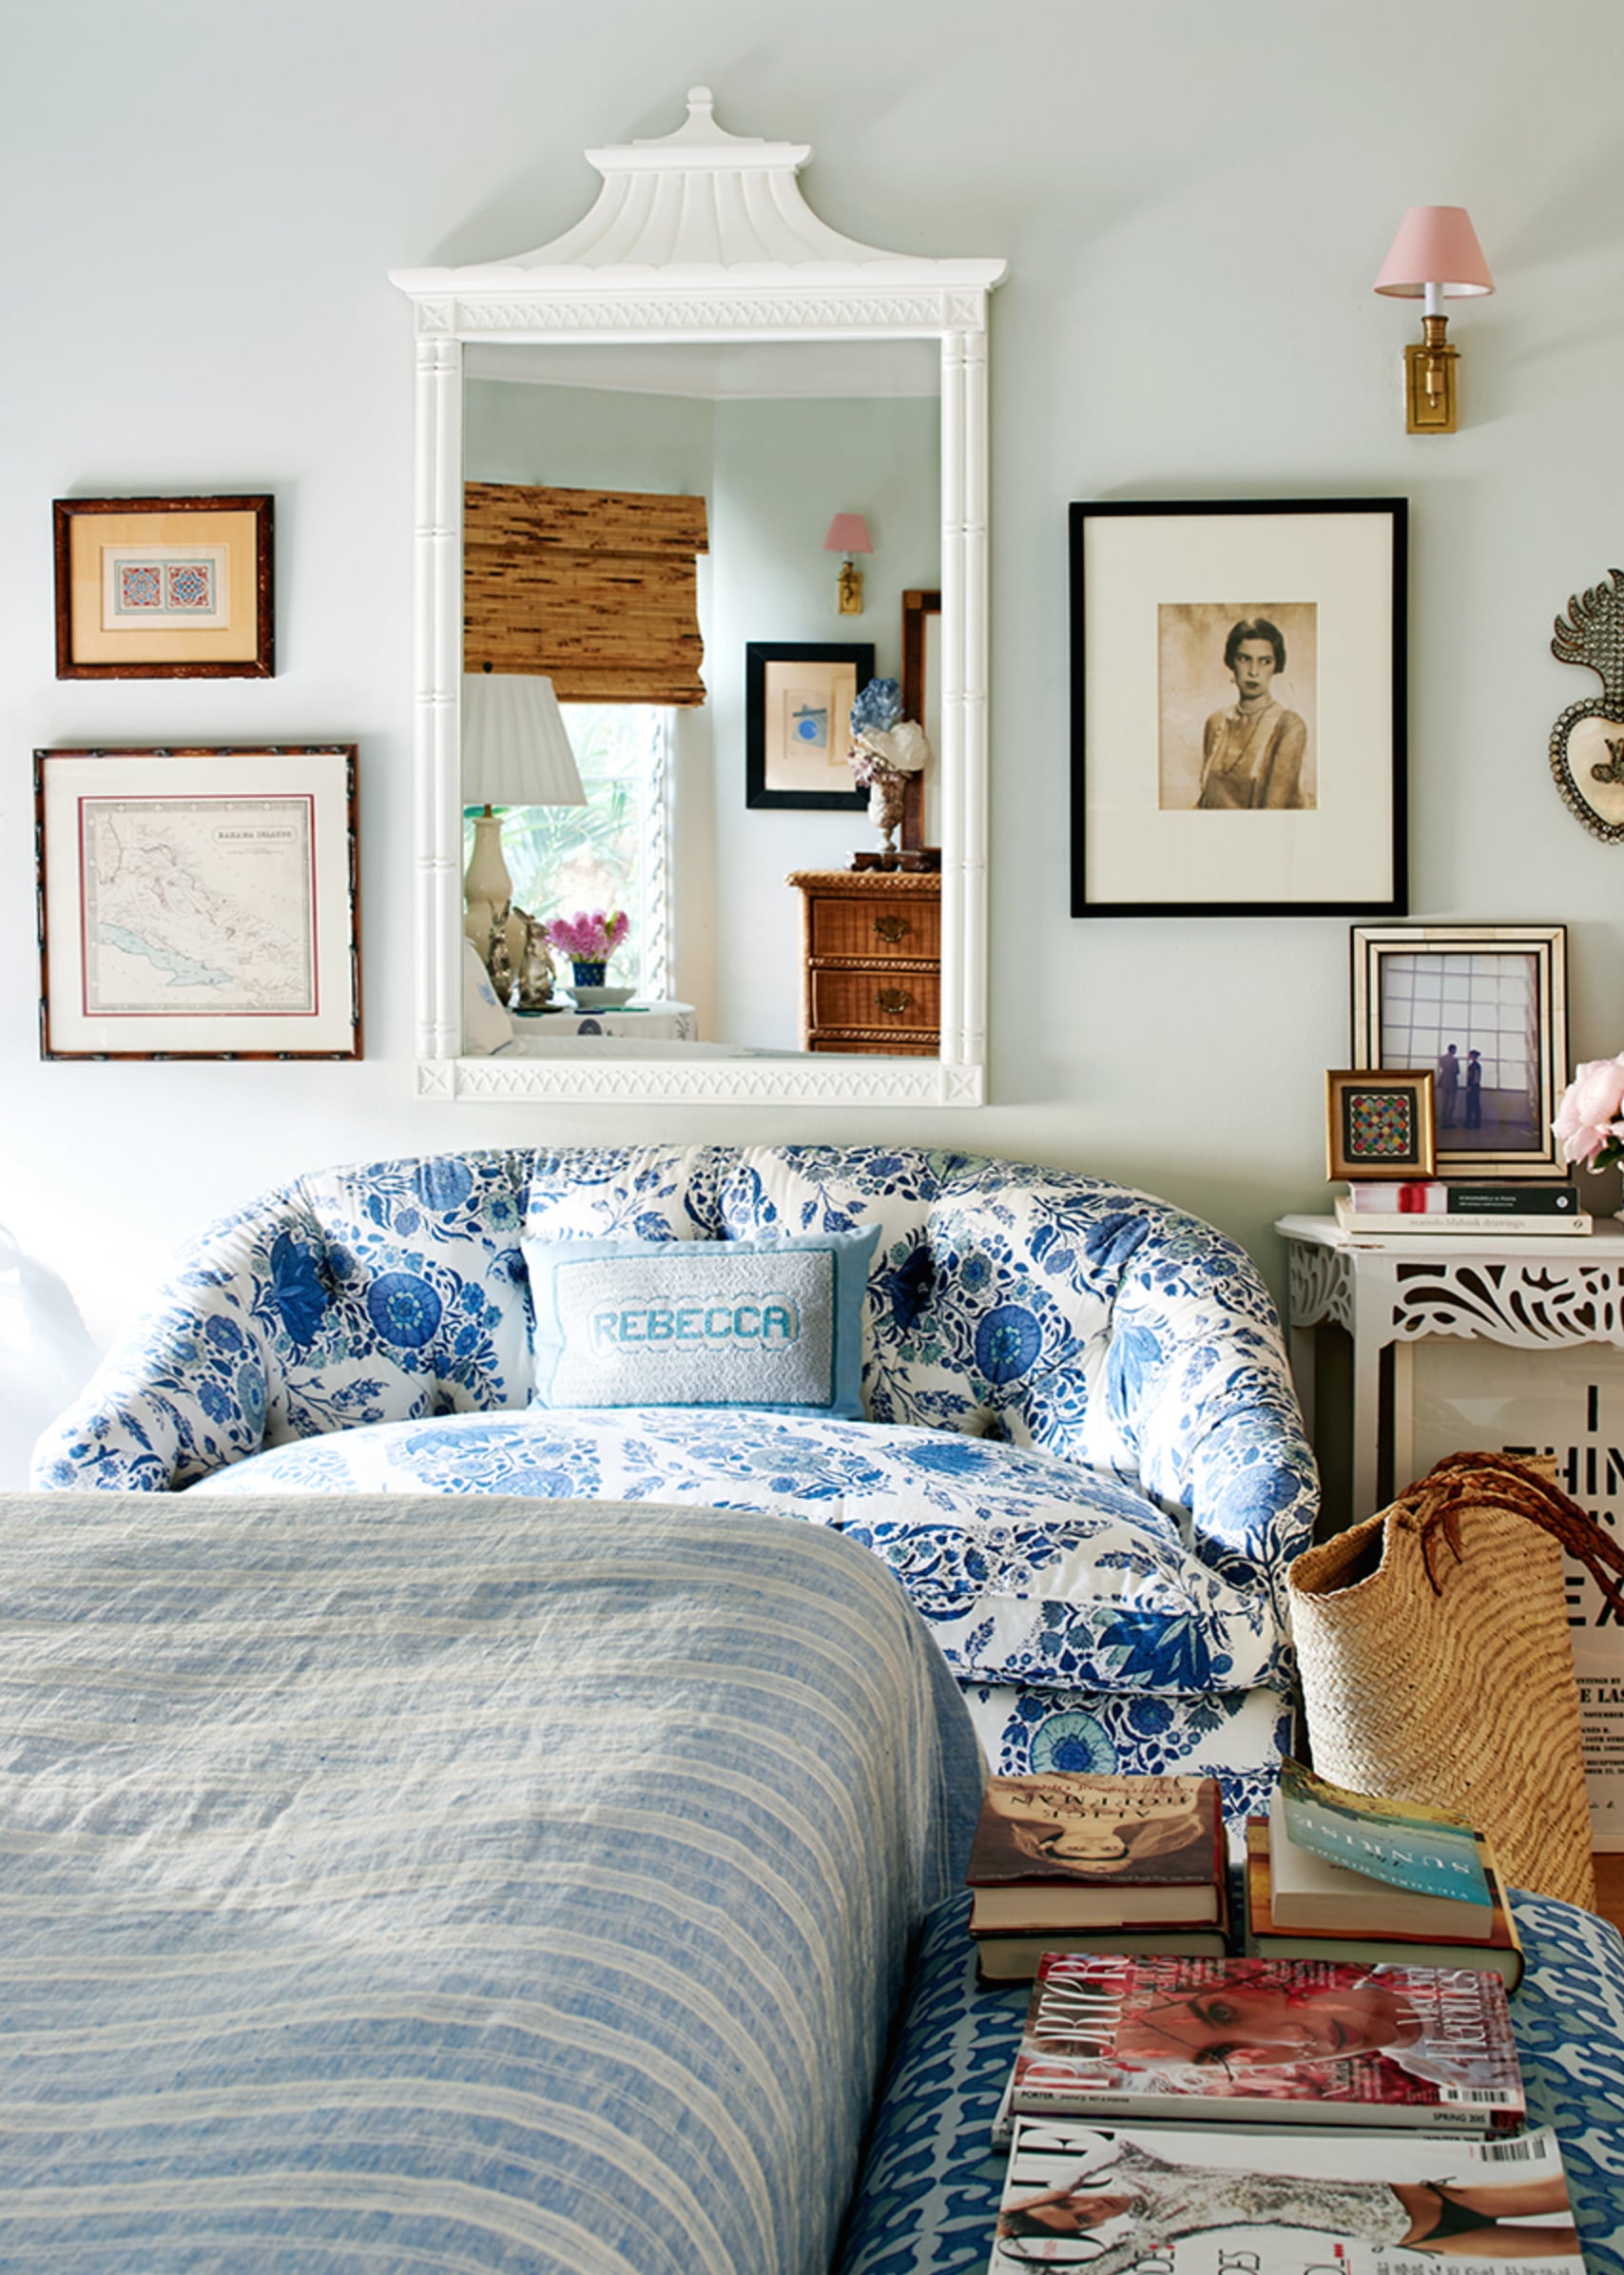 beach bohemian bedroom with classic style | house tour on coco kelley